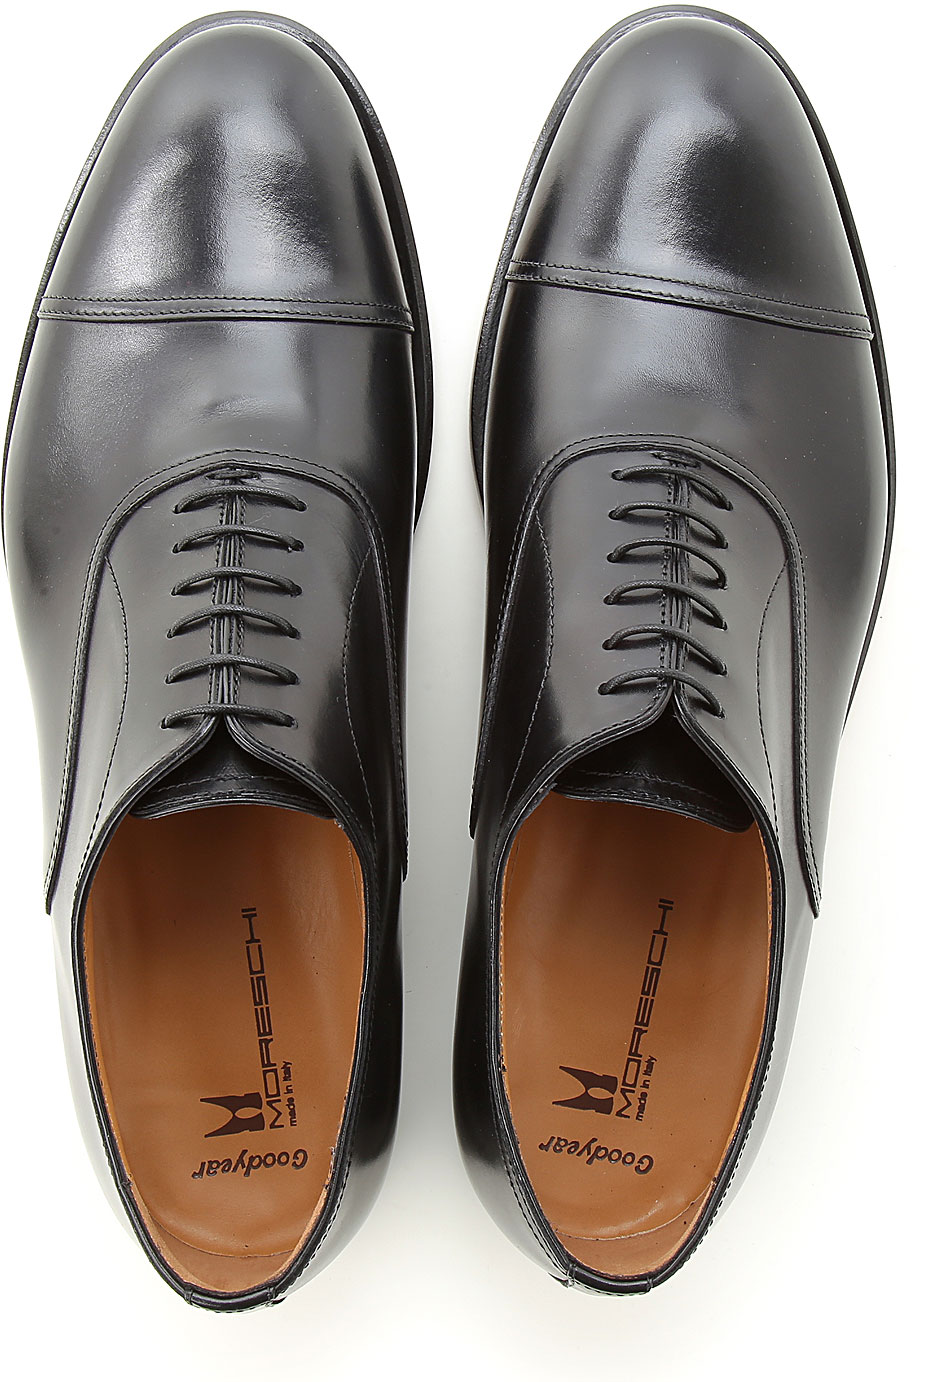 Mens Shoes Moreschi, Style code: cardiff-162-100